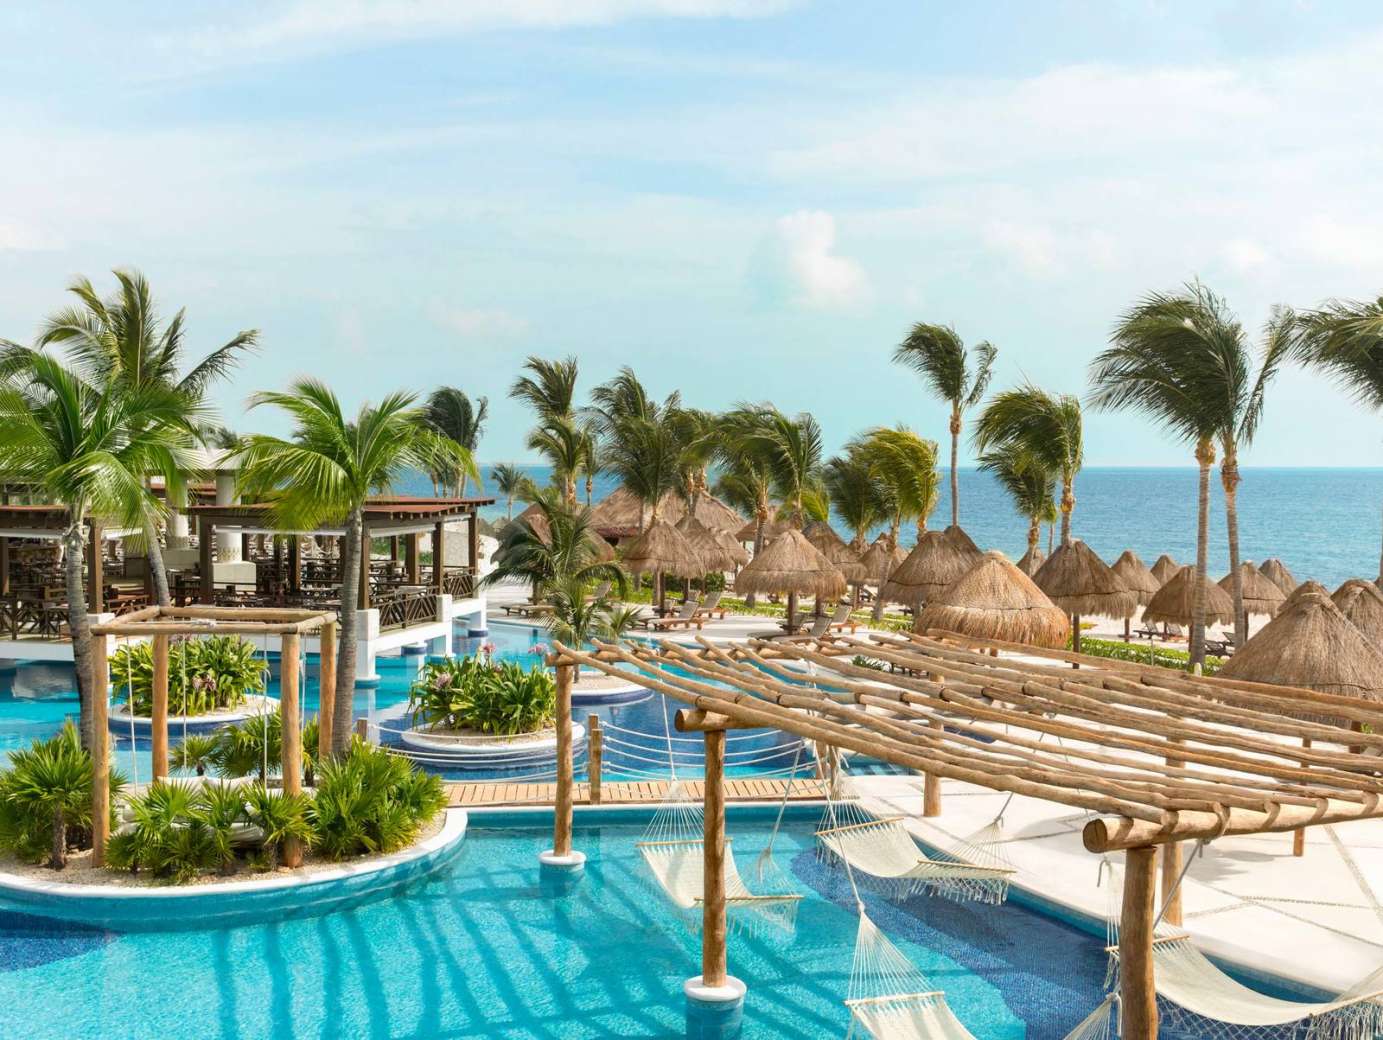 Book Your Holiday To Excellence Playa Mujeres, Playa Mujeres, Mexico | 